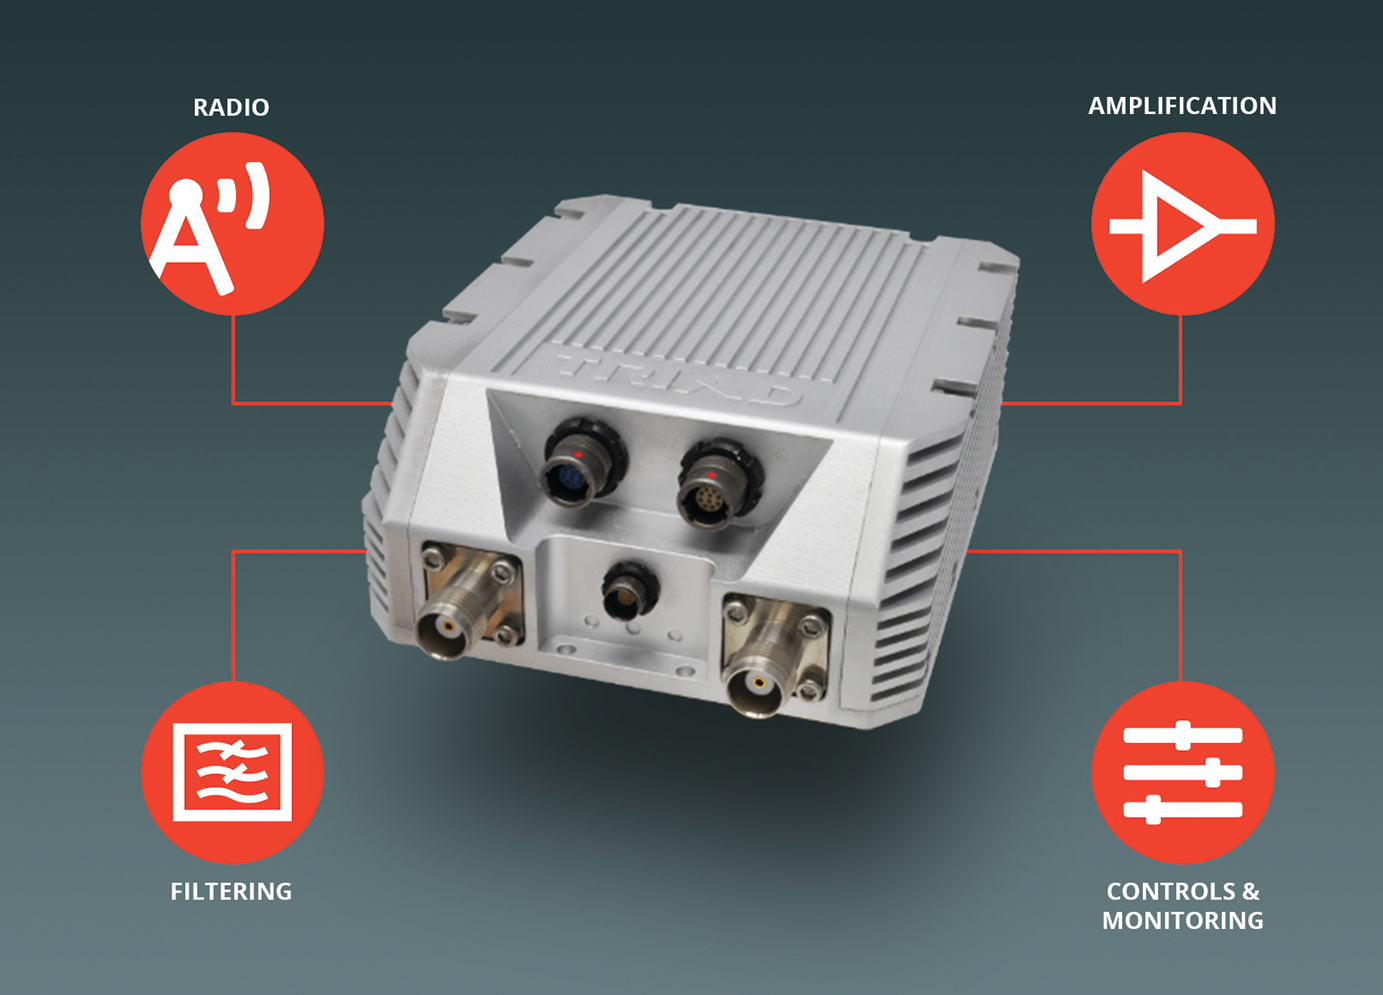 The Triad High Power Radio (THPR) system is a radio-agnostic solution for when extended range is needed from modern, high bandwidth military radio systems.